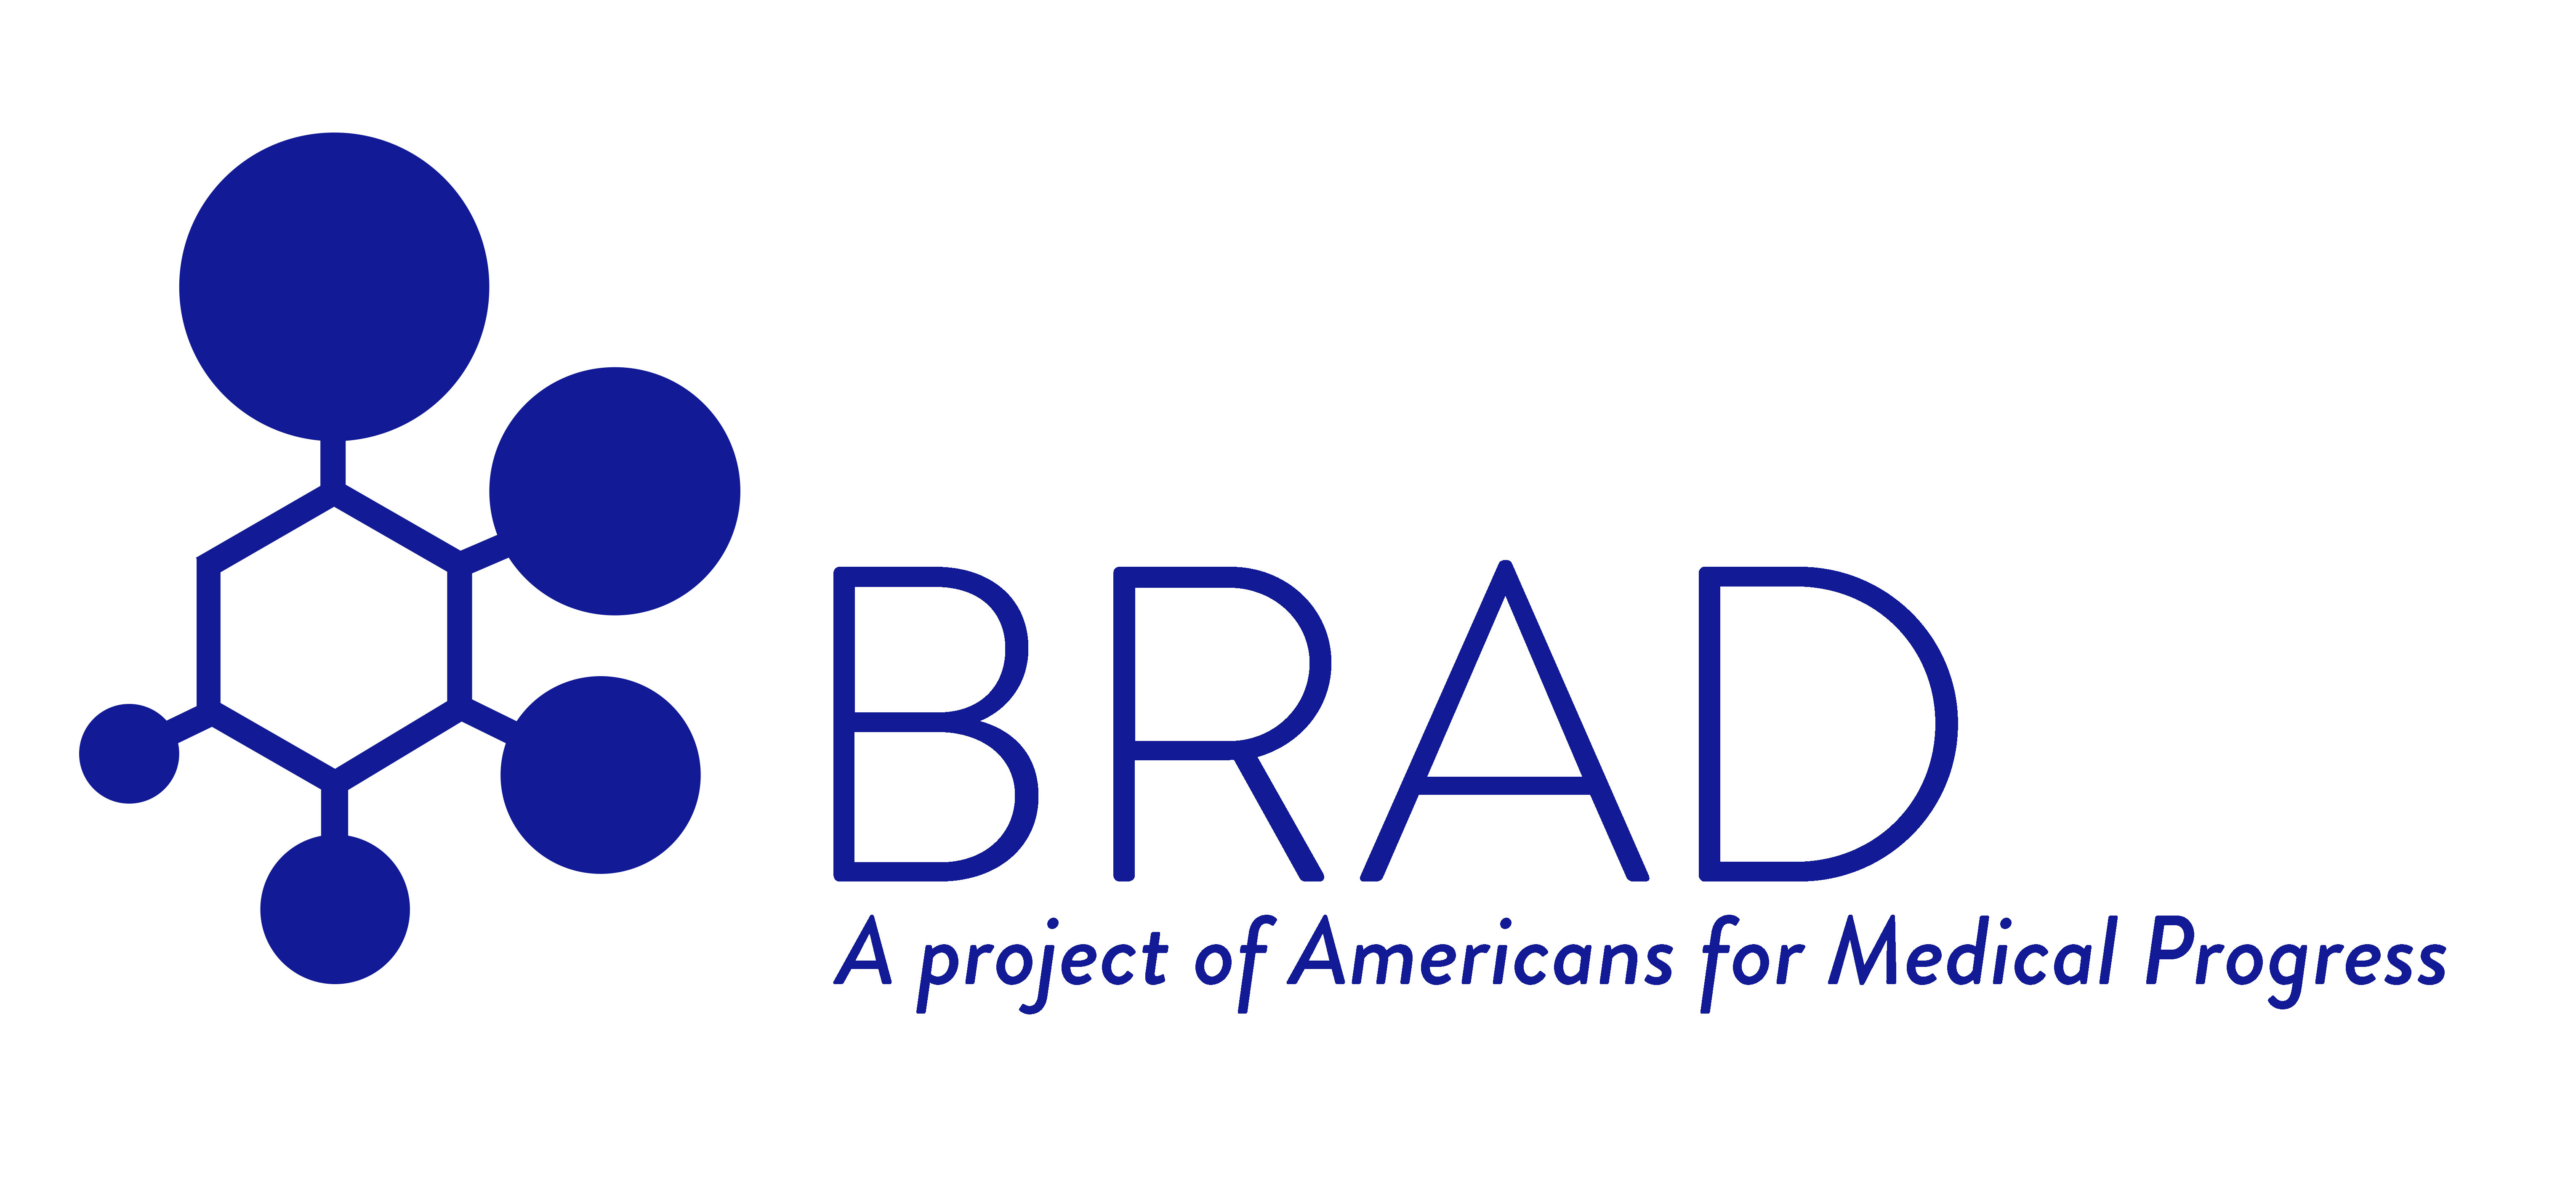 BRAD. A project of Americans for Medical Progress.